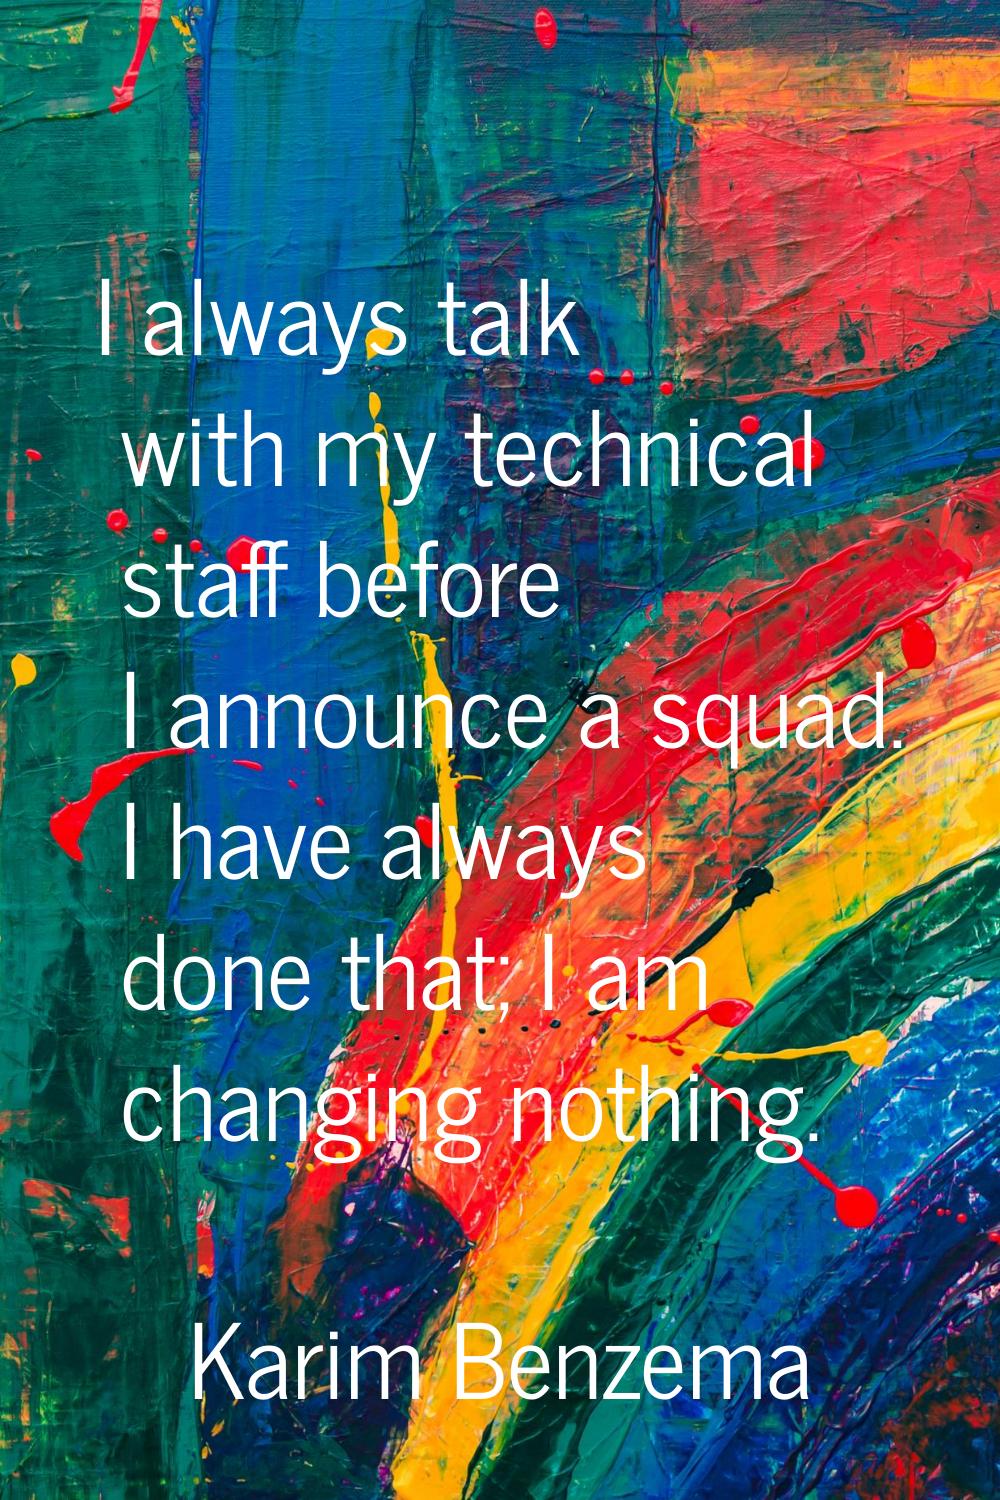 I always talk with my technical staff before I announce a squad. I have always done that; I am chan